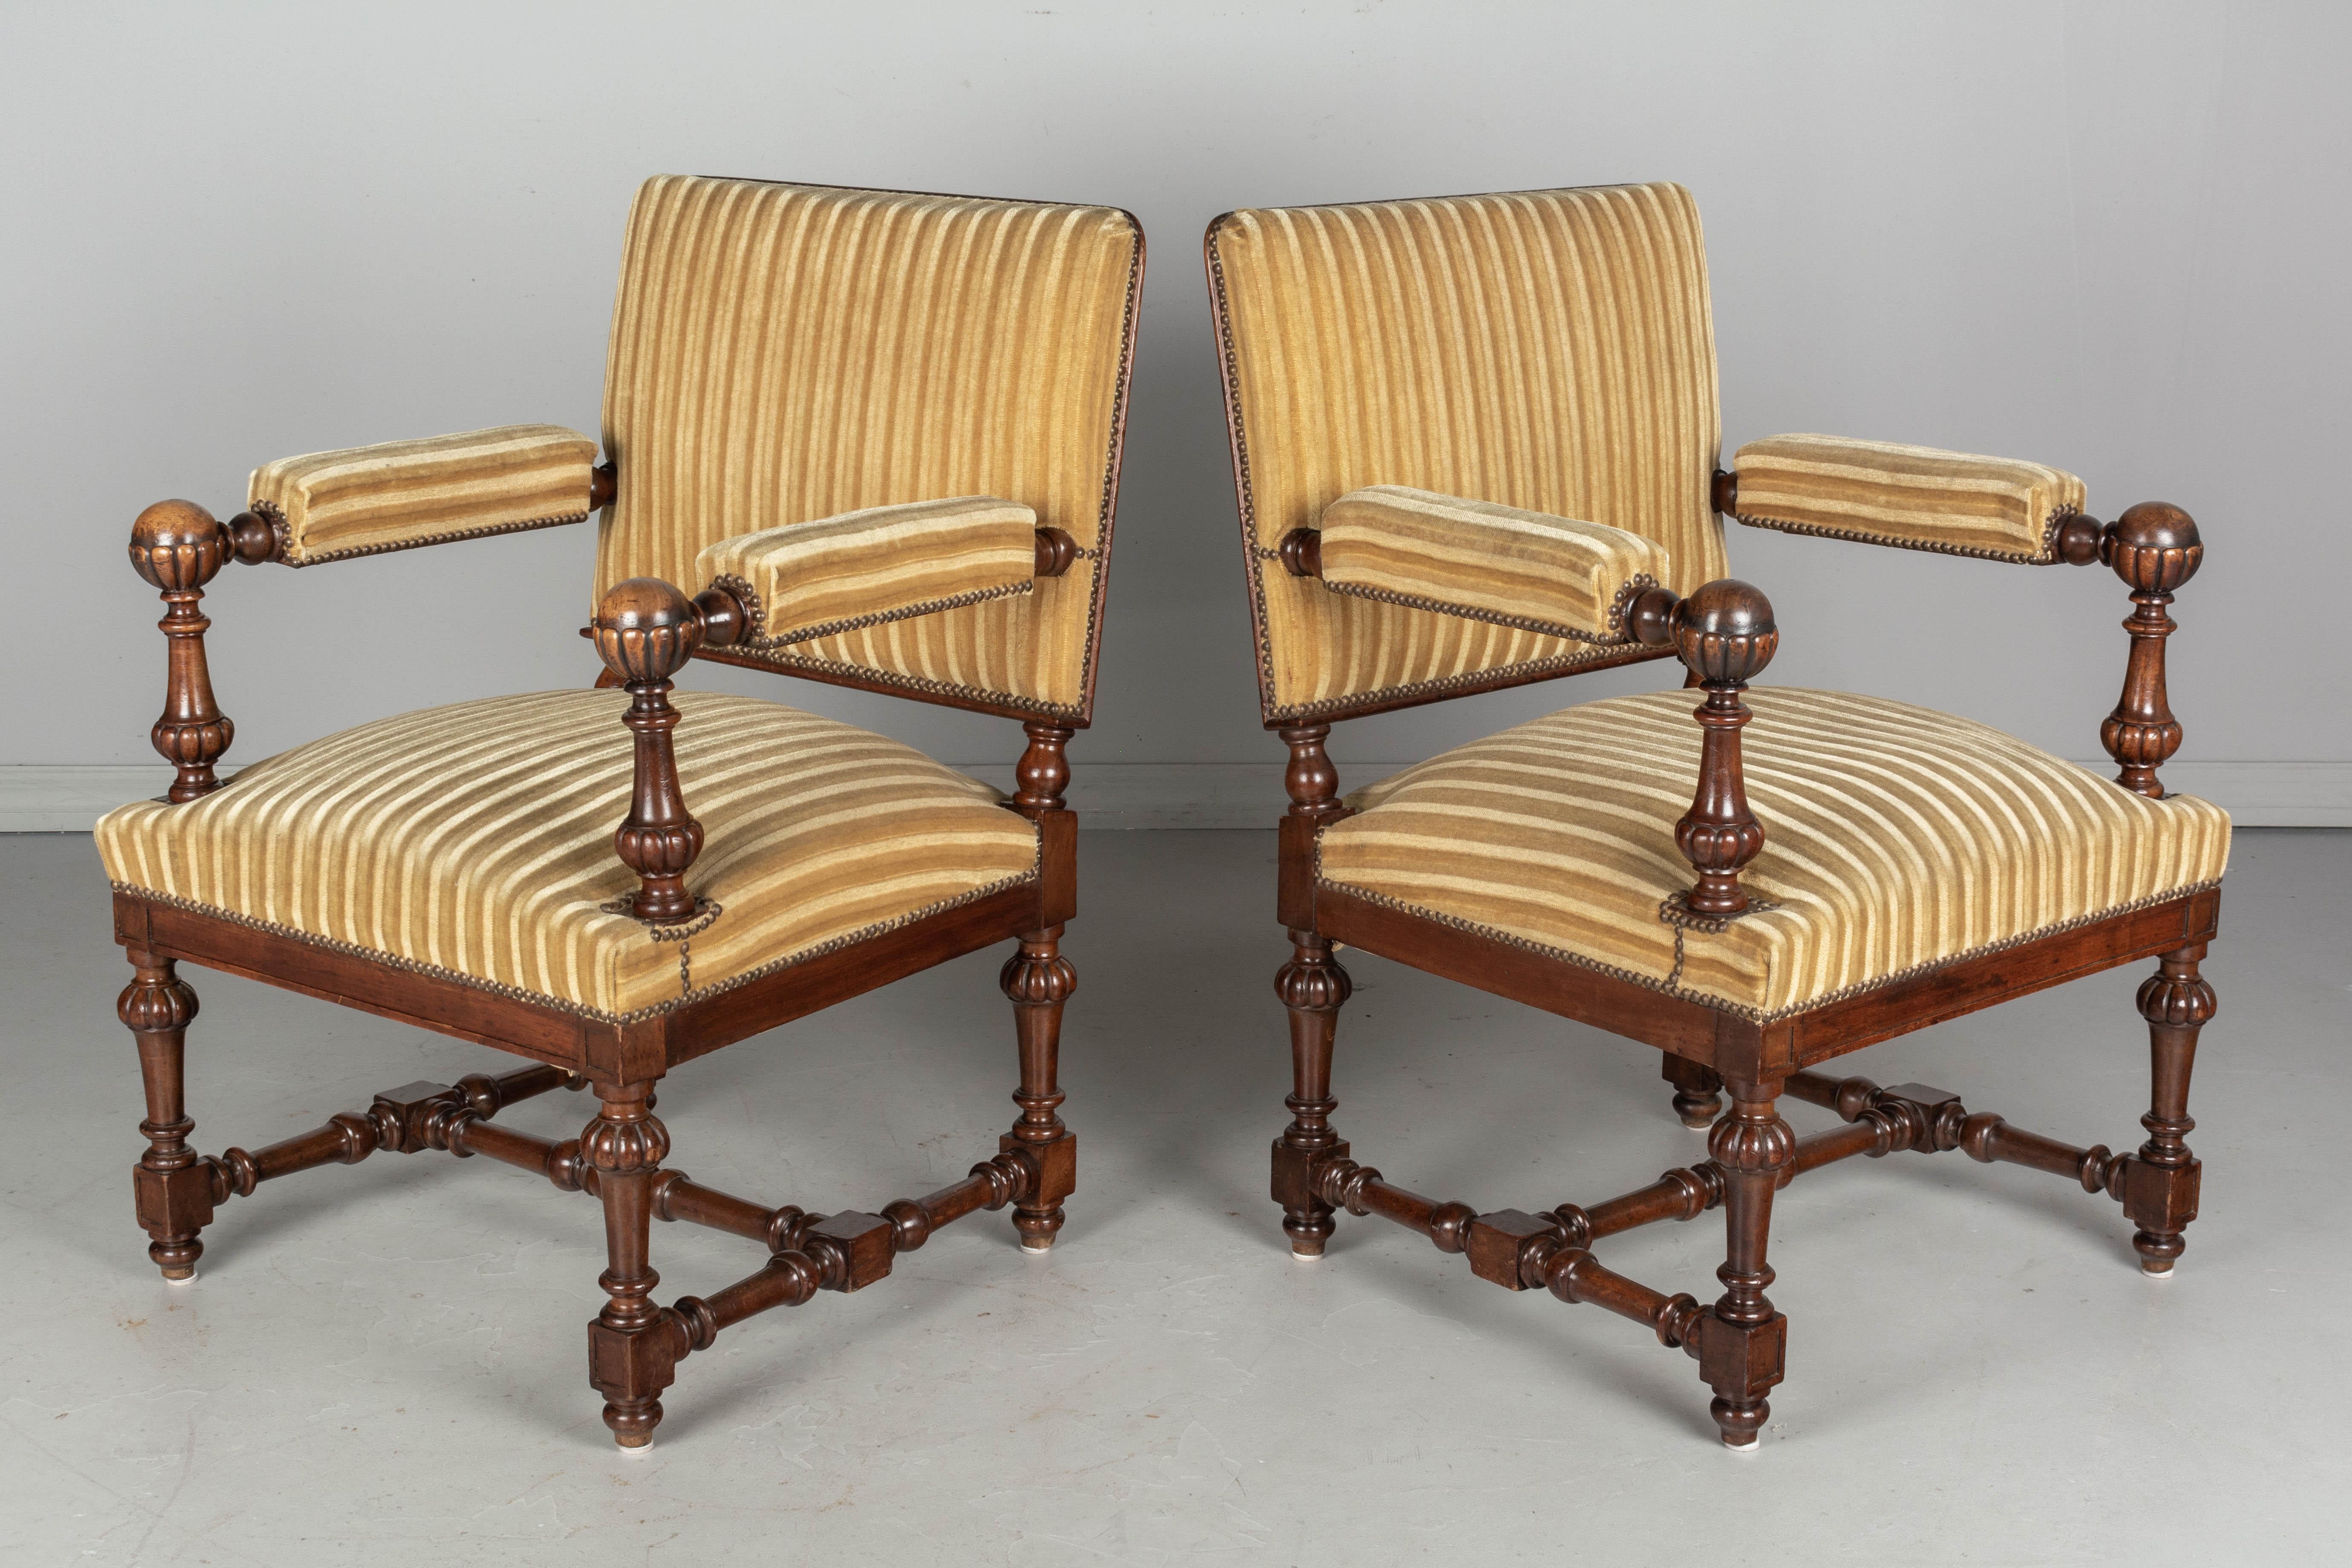 A pair of Louis XIV style French fauteuils, or arm chairs, with solid walnut frames. Boldly carved armrests with large ball finials and turned wood spindle legs and stretcher. Nice proportions with square profile, sturdy construction and comfortable